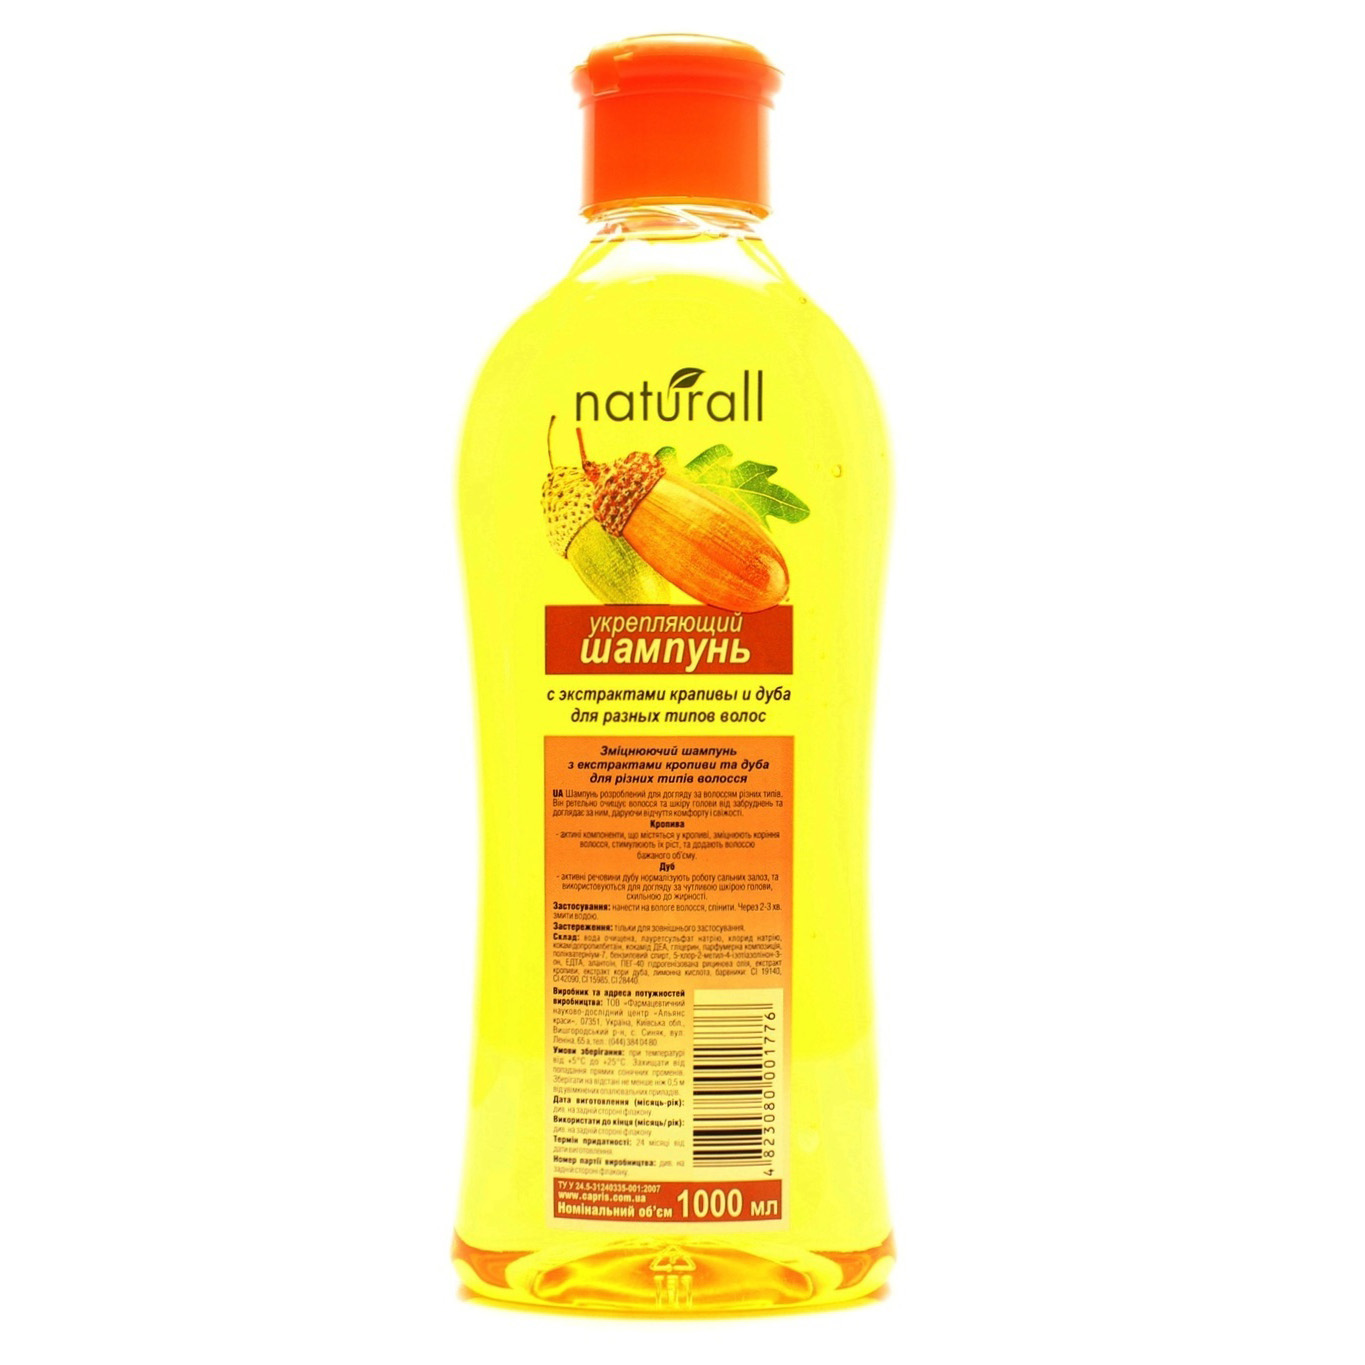 Naturall strengthening shampoo with nettle and oak extracts for different hair types 1000 ml